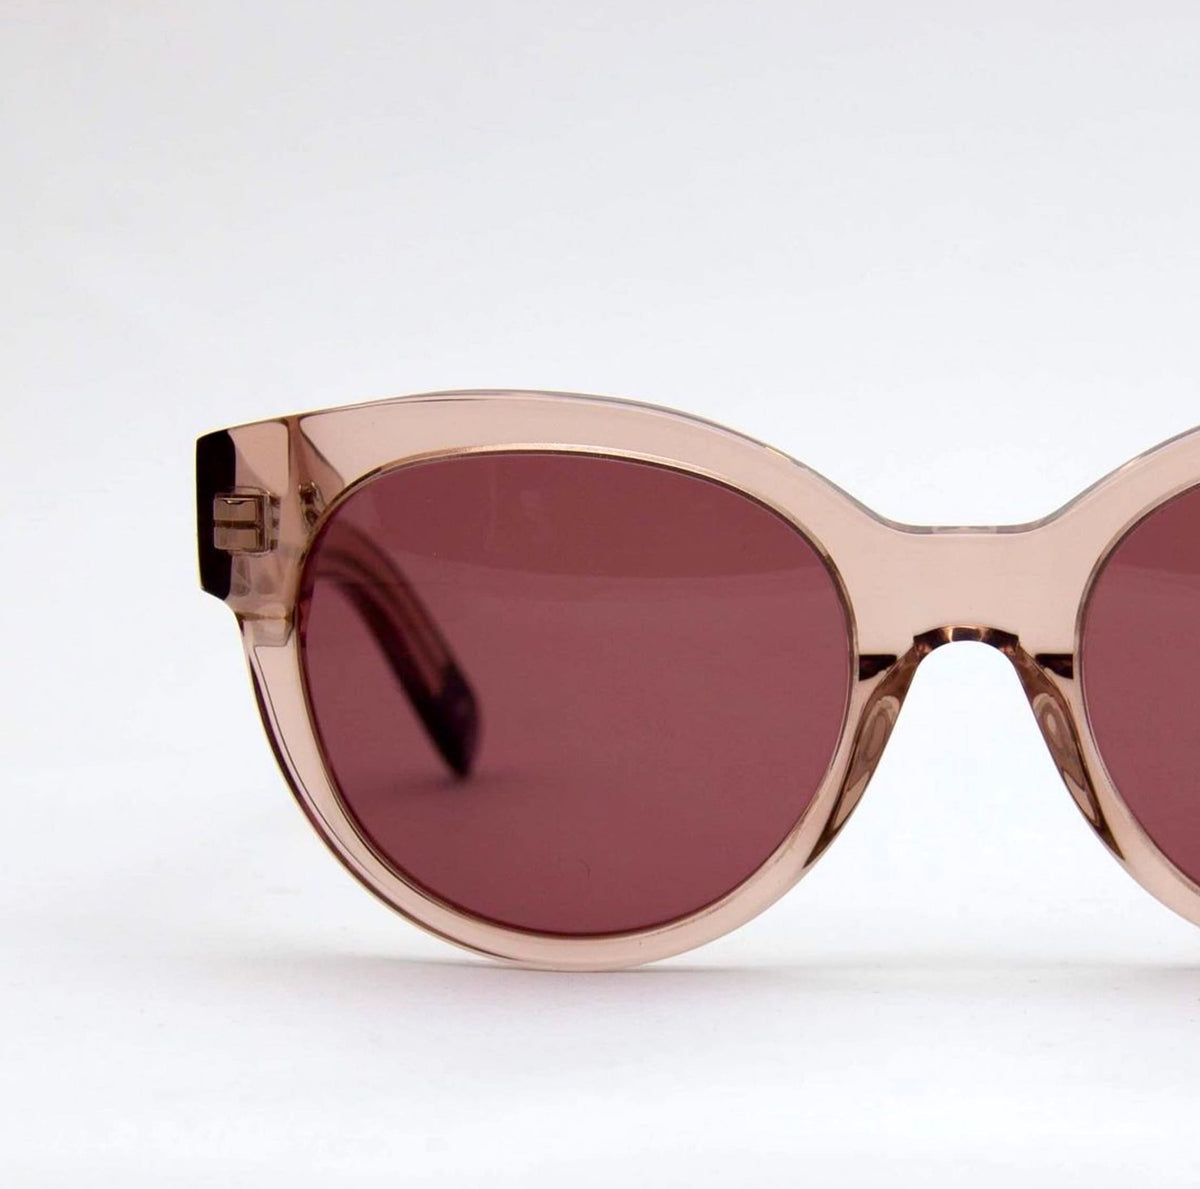 A pair of Paris Sunglasses - Pale Rose by Dick Moby on a white background.